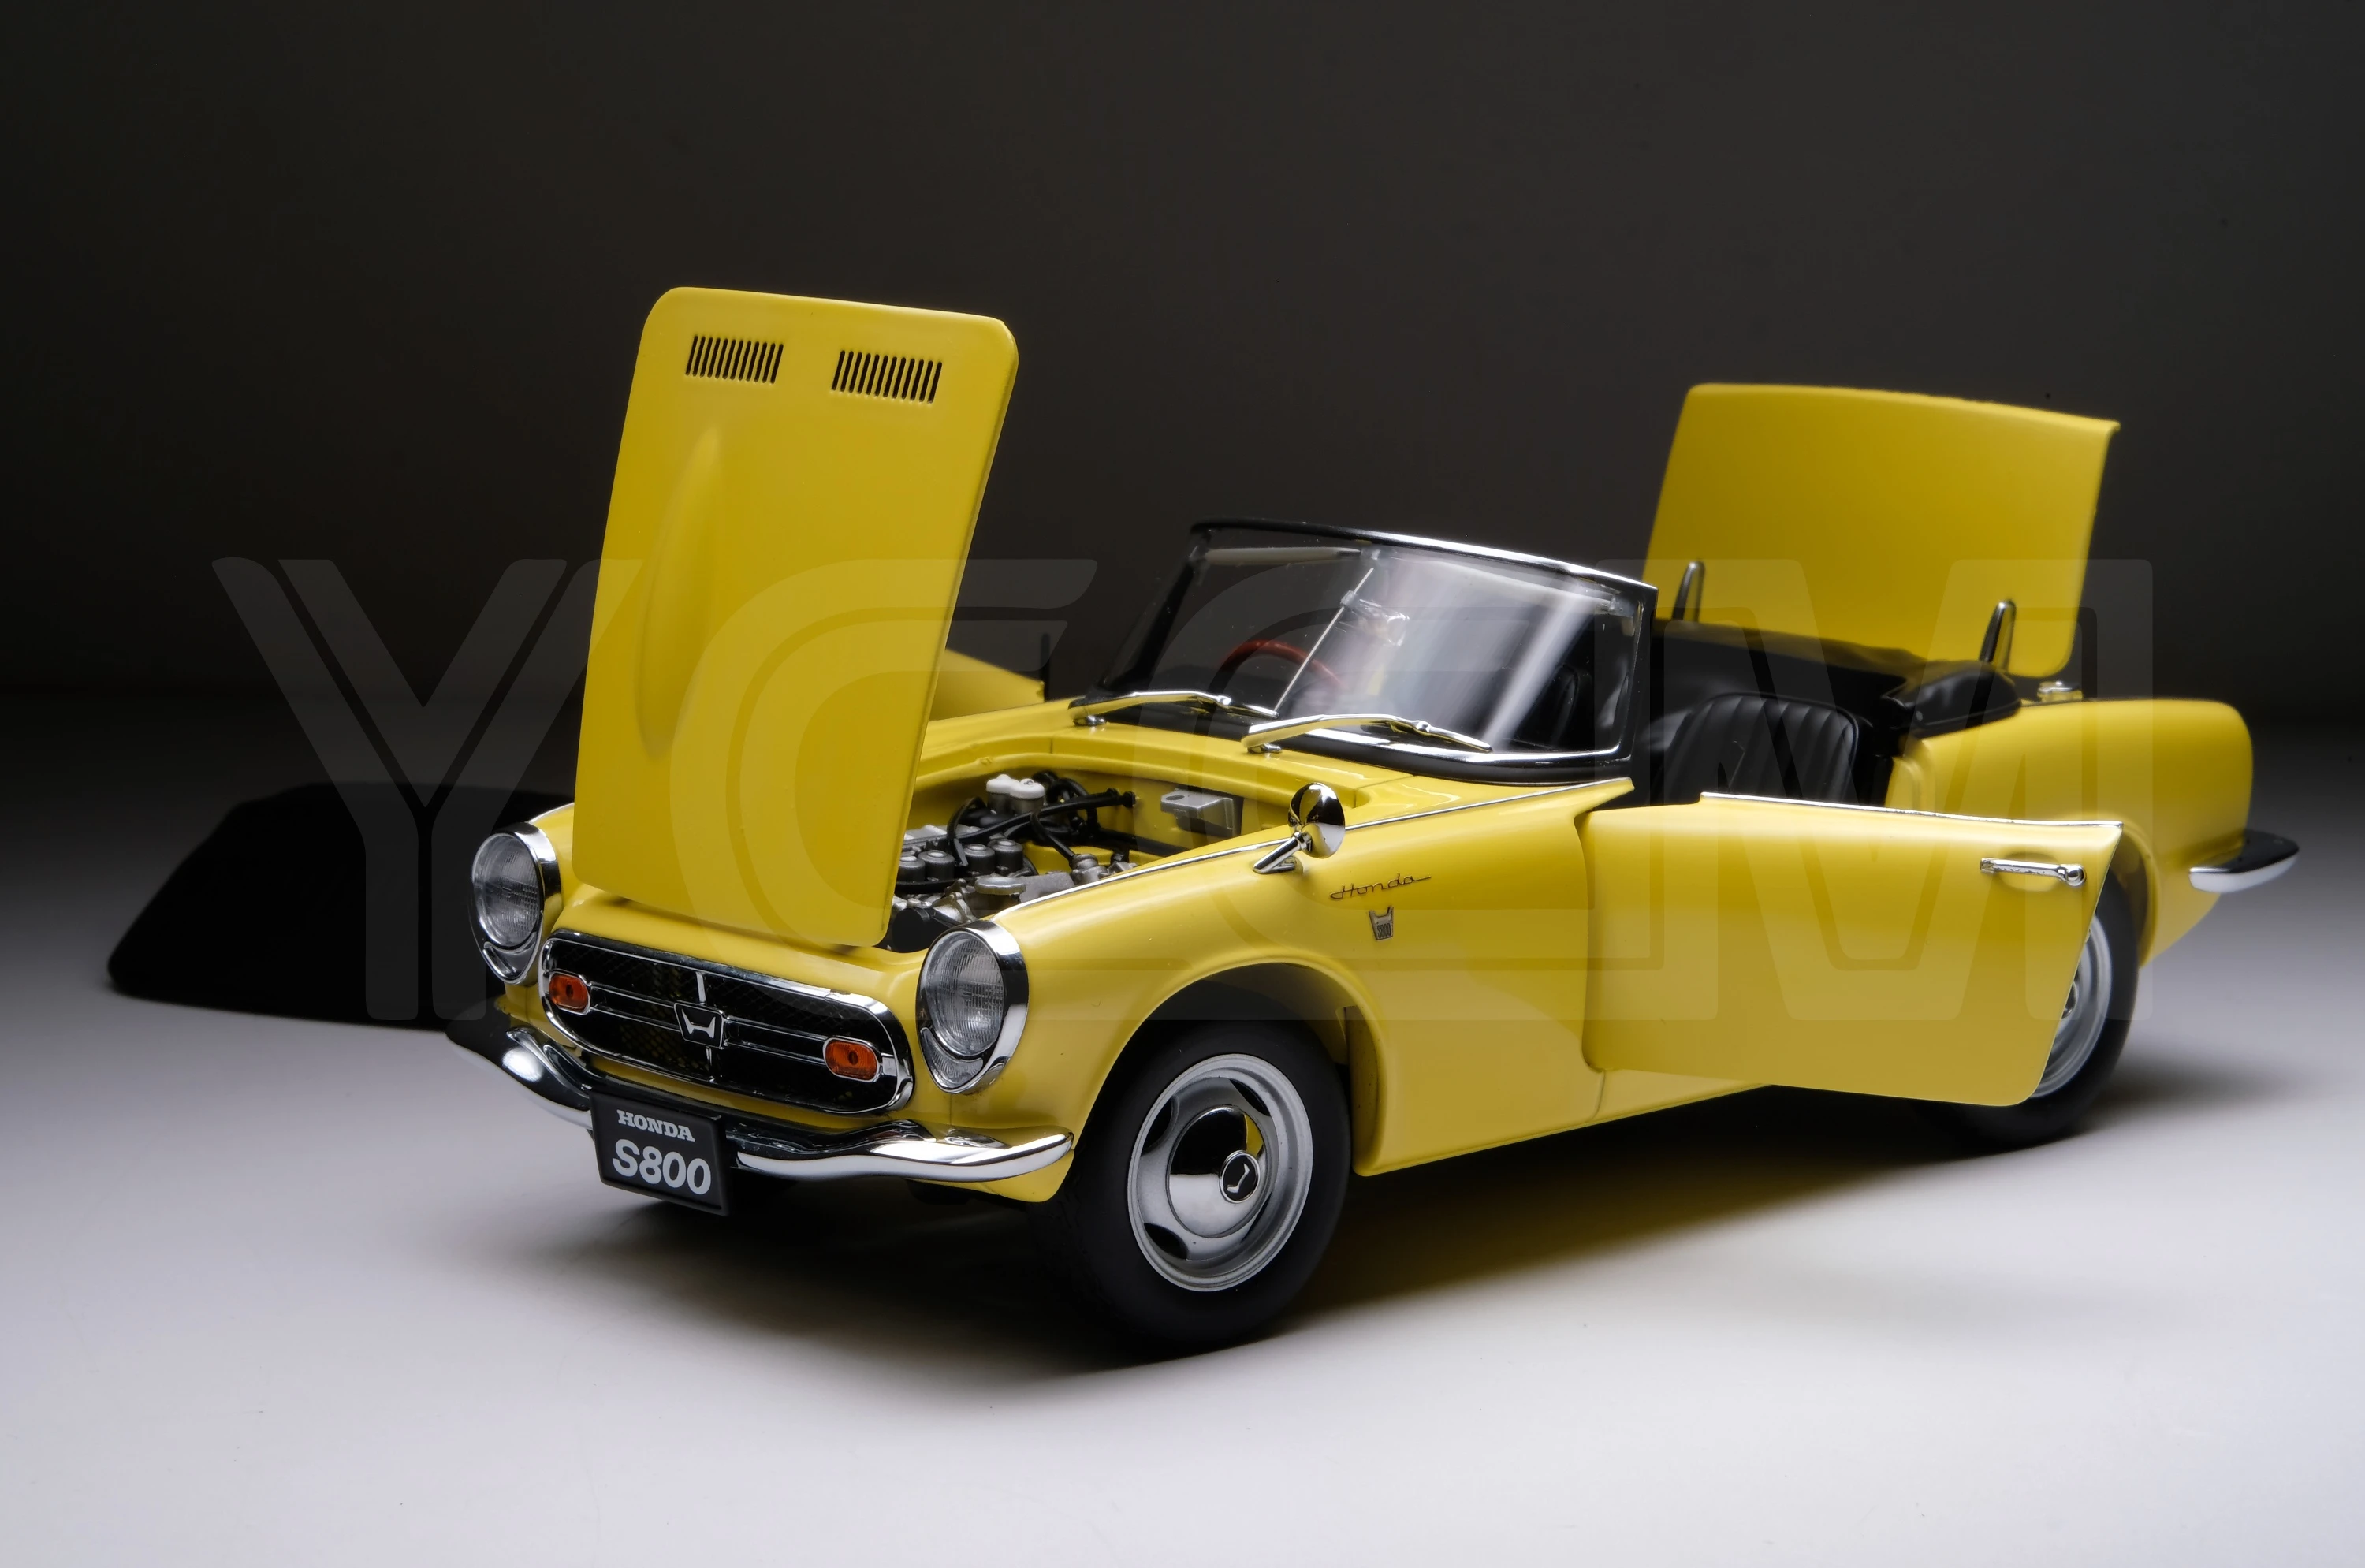 

Autoart 1:18 Honda S800 Yellow JDM Out of Print Simulated Limited Edition Resin Alloy Static Car Model Toy Gift